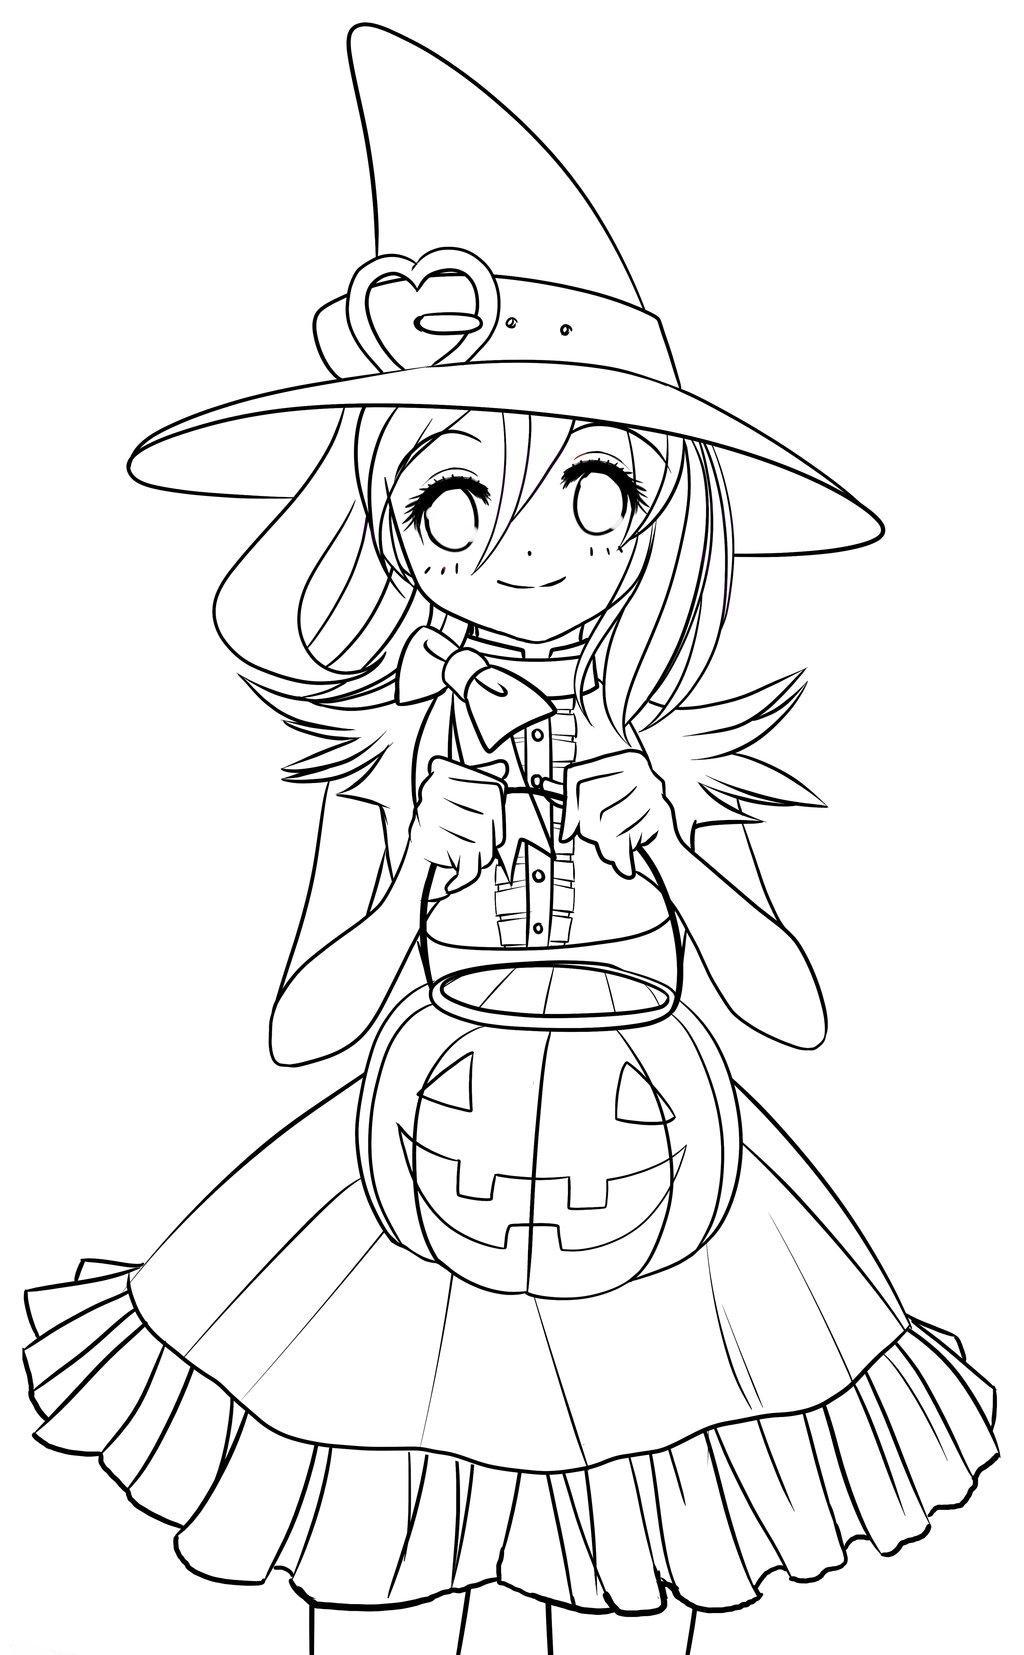 Halloween Girl Coloring Pages : Halloween Coloring Page Cute